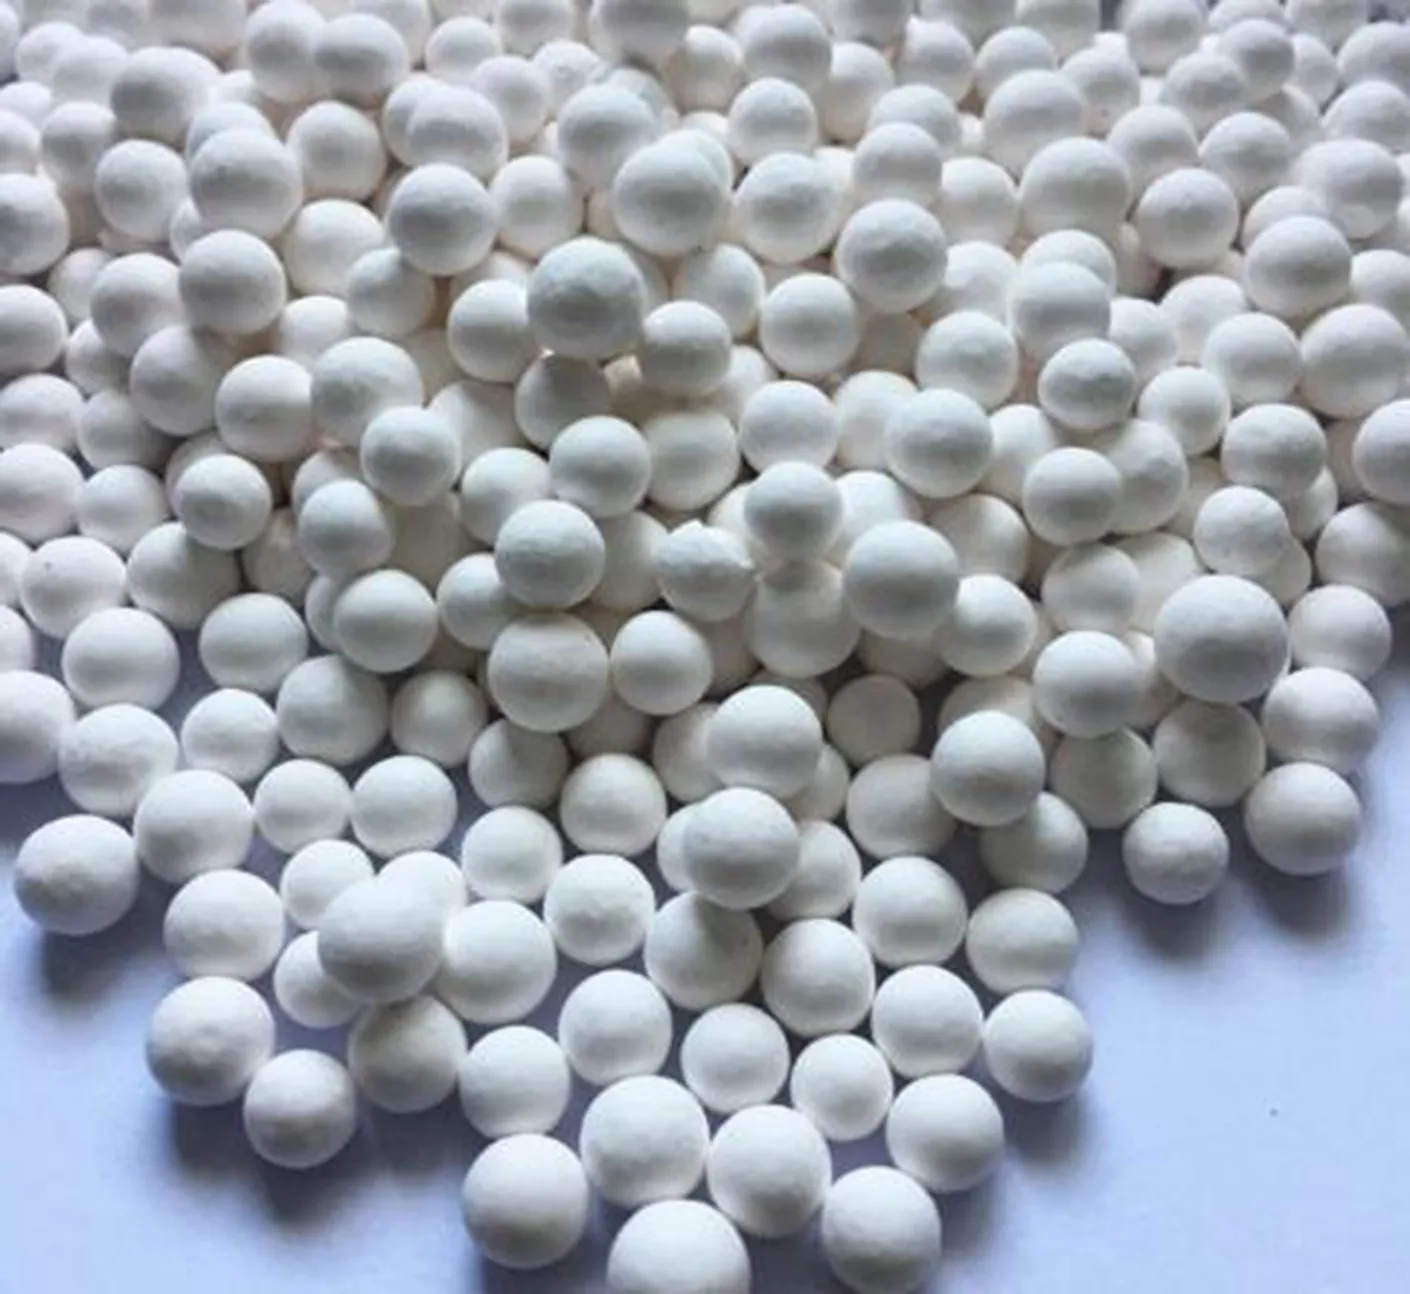 Are Ceramic Alumina Balls Suitable for Fine Grinding Applications?